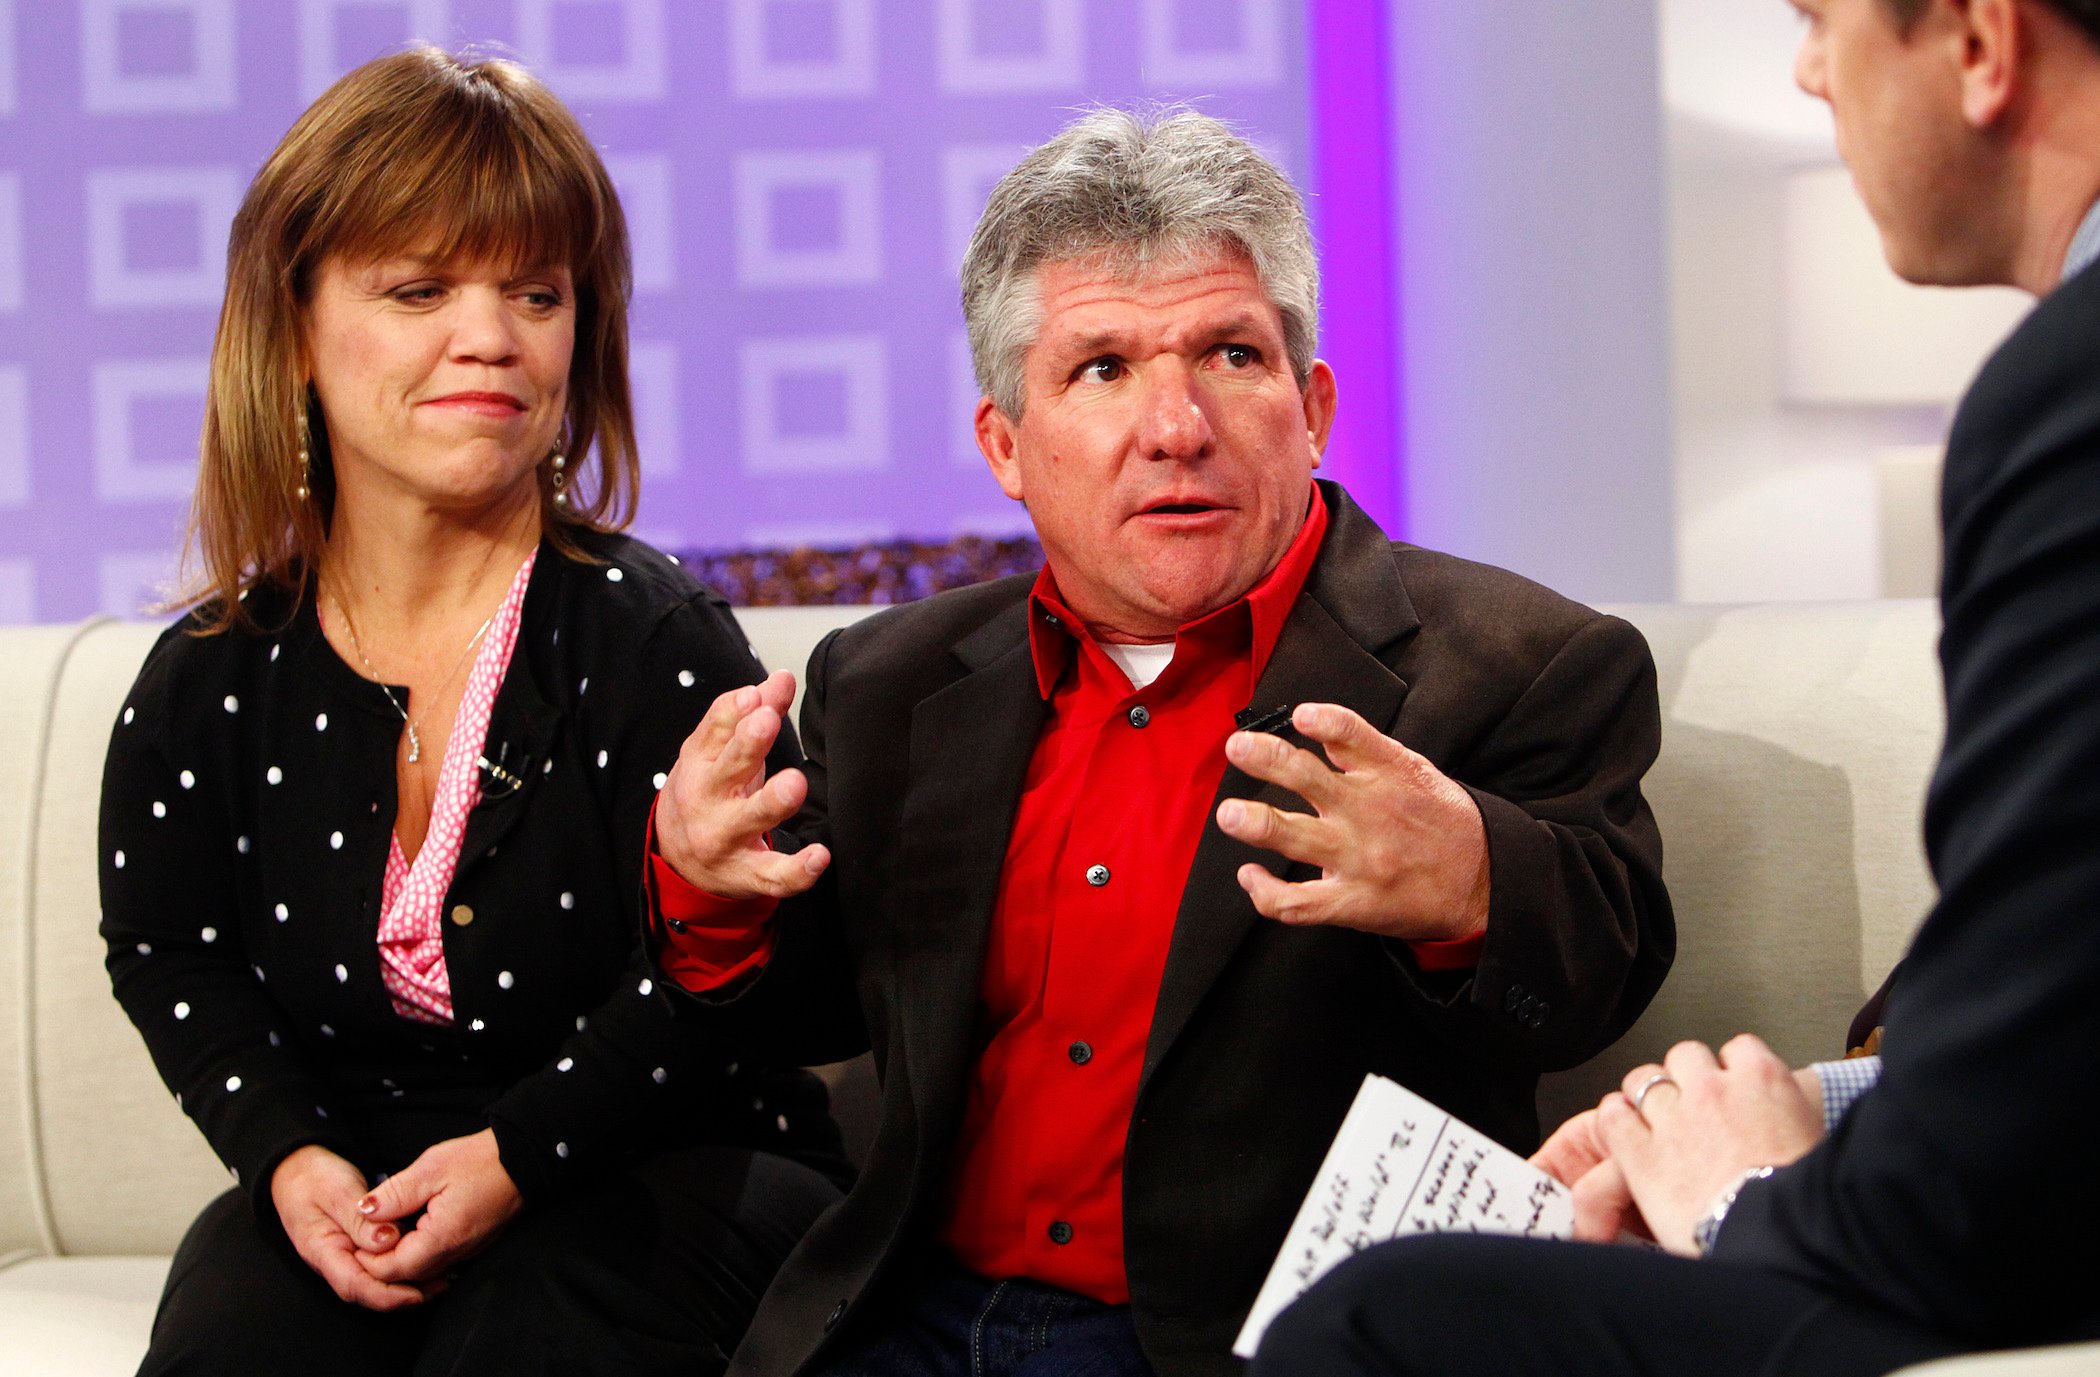 Amy Roloff and Matt Roloff from 'Little People, Big World' sitting next to each other during an interview